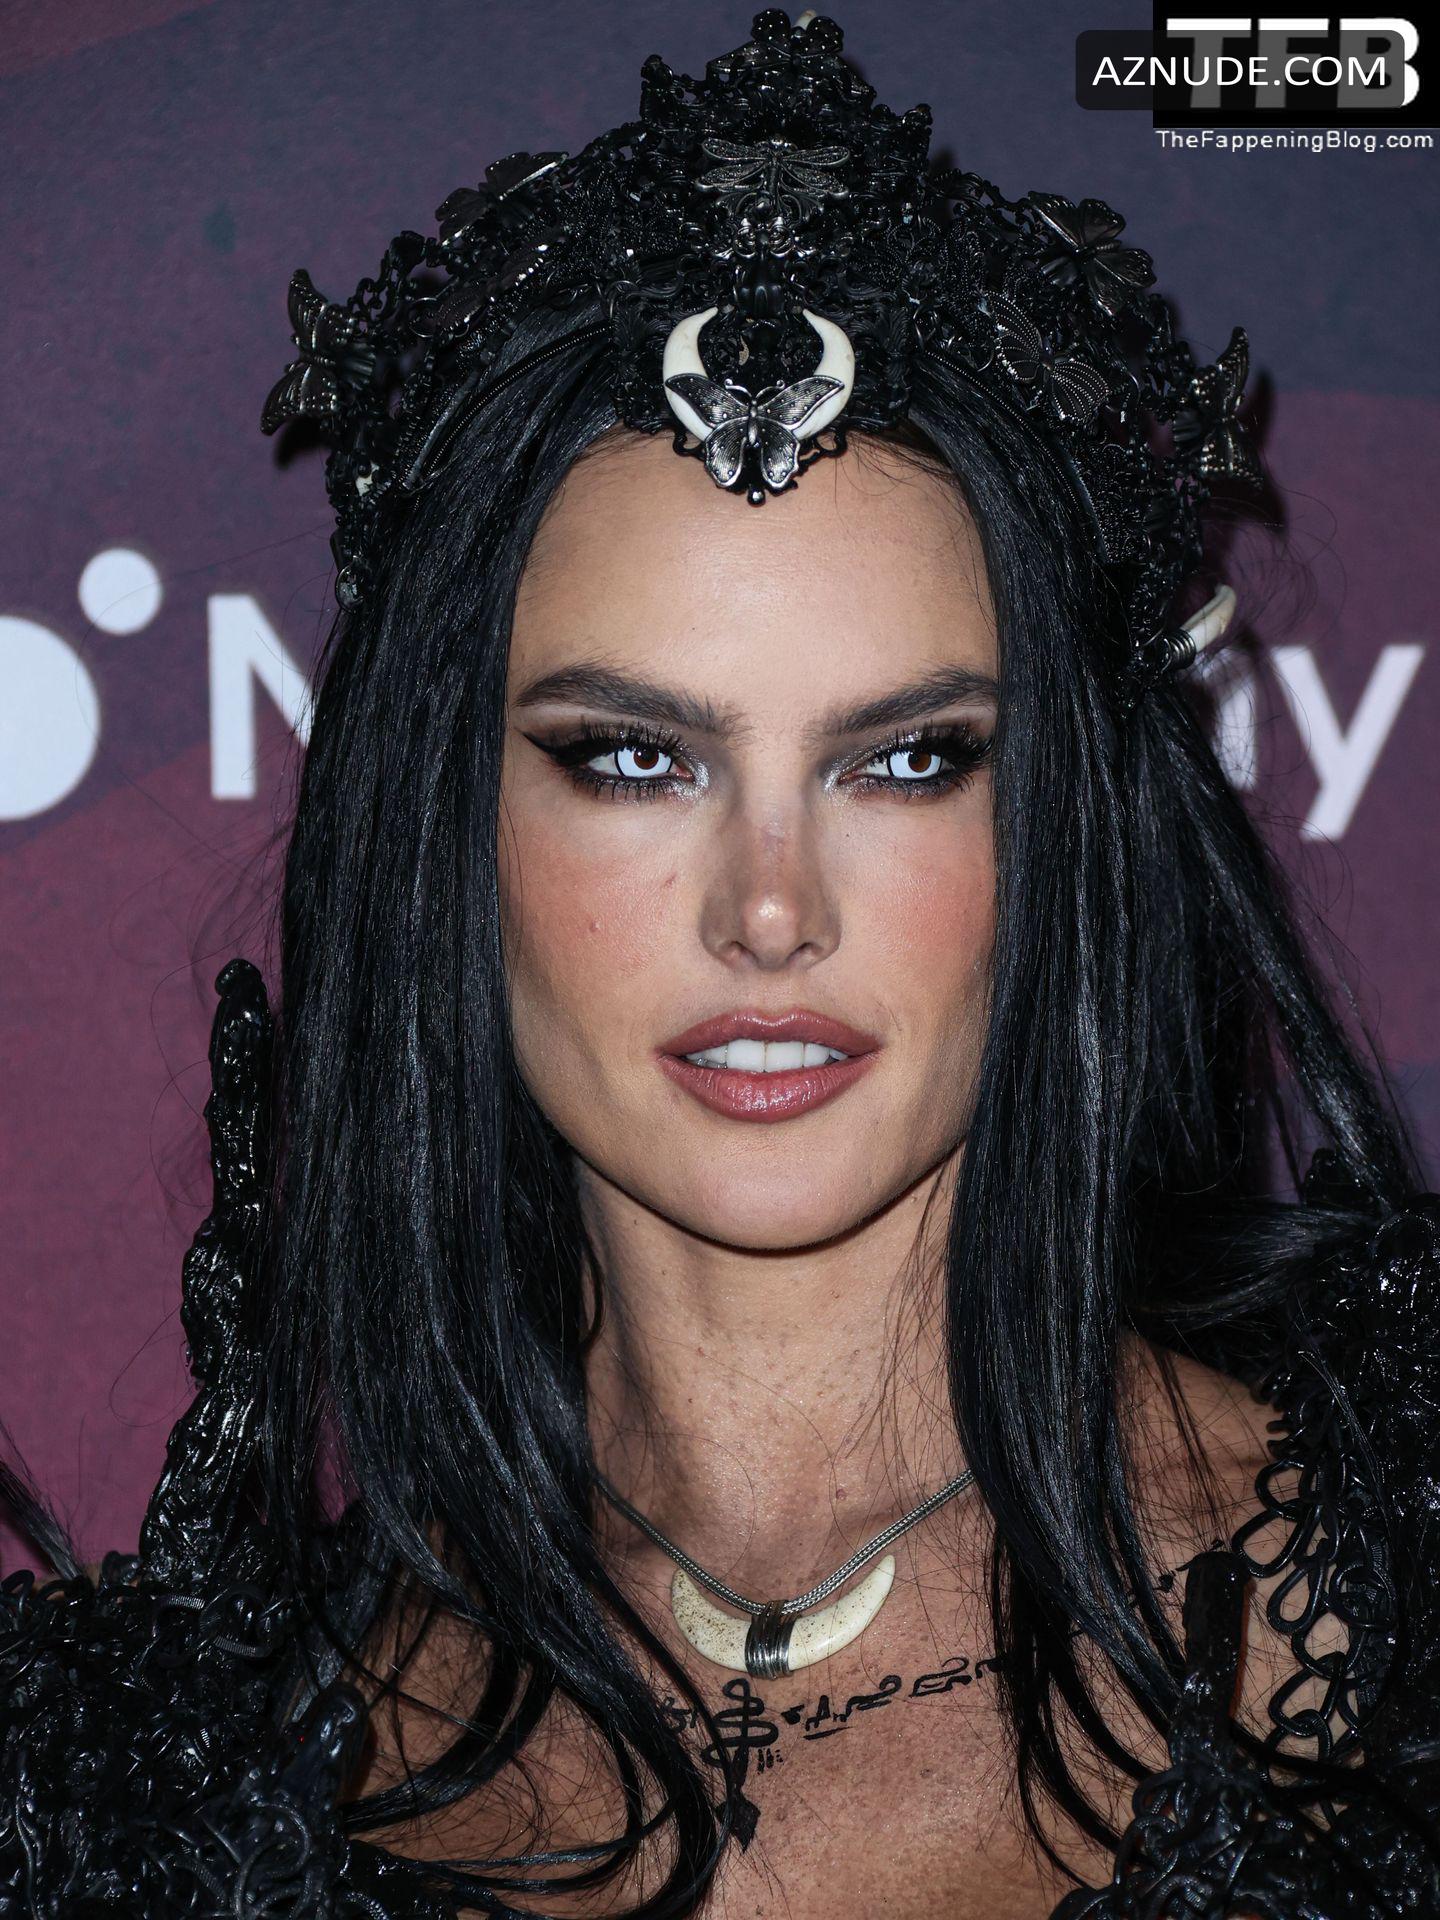 Alessandra Ambrosio Sexy Seen Showcasing Her Hot Tits And Legs At The Carnevil Halloween Party